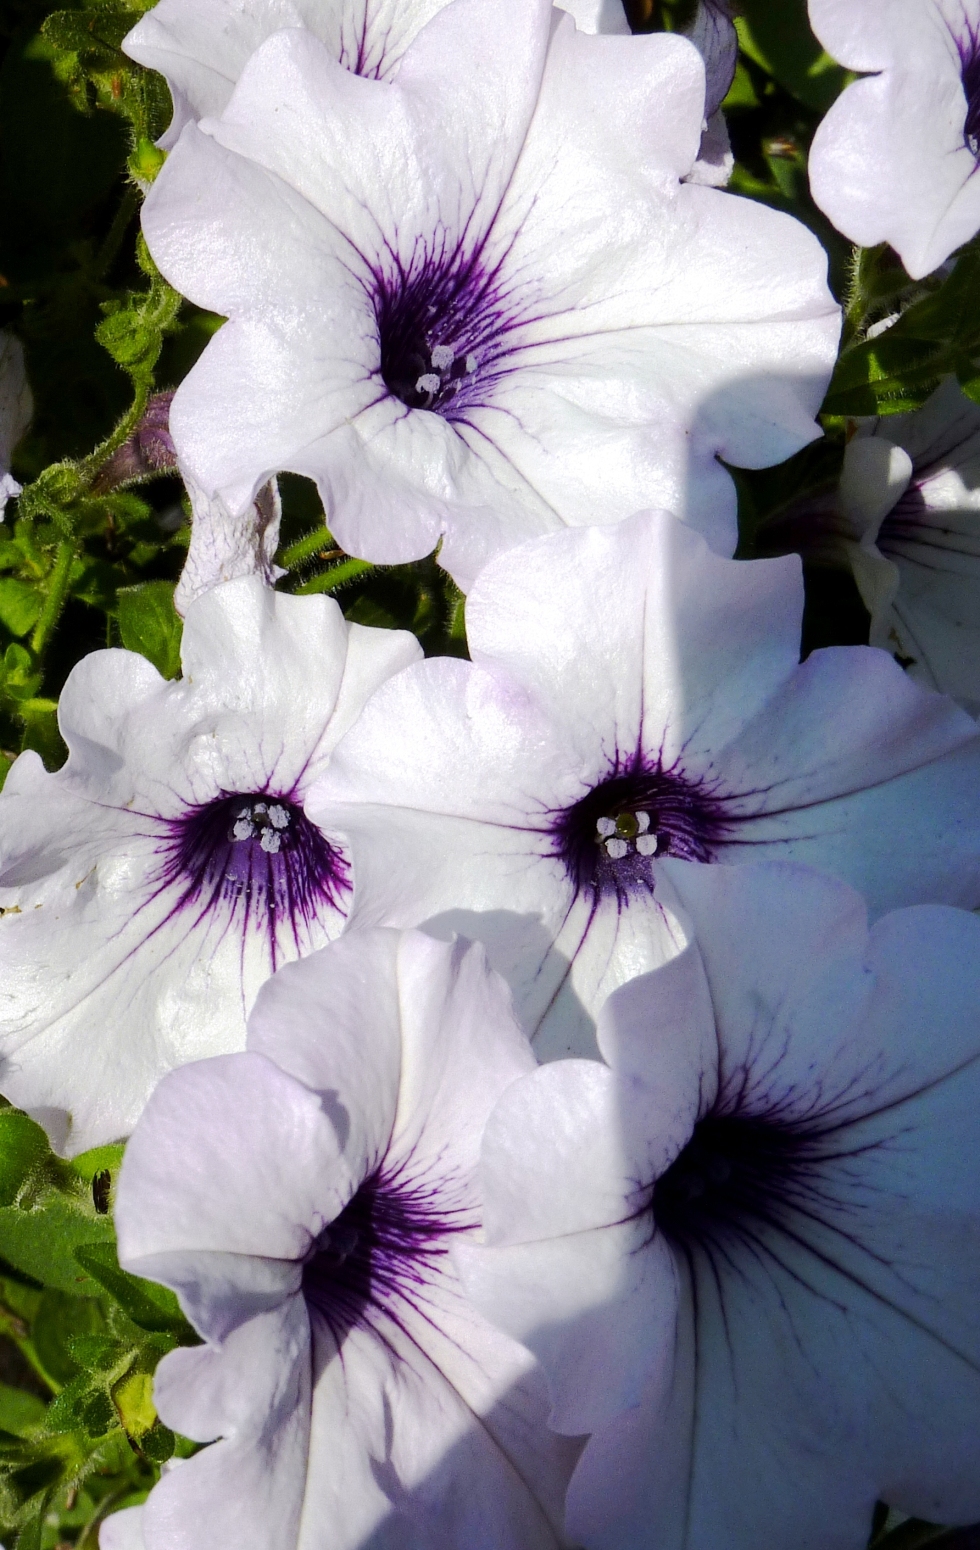 Pretty Petunias (user submitted)